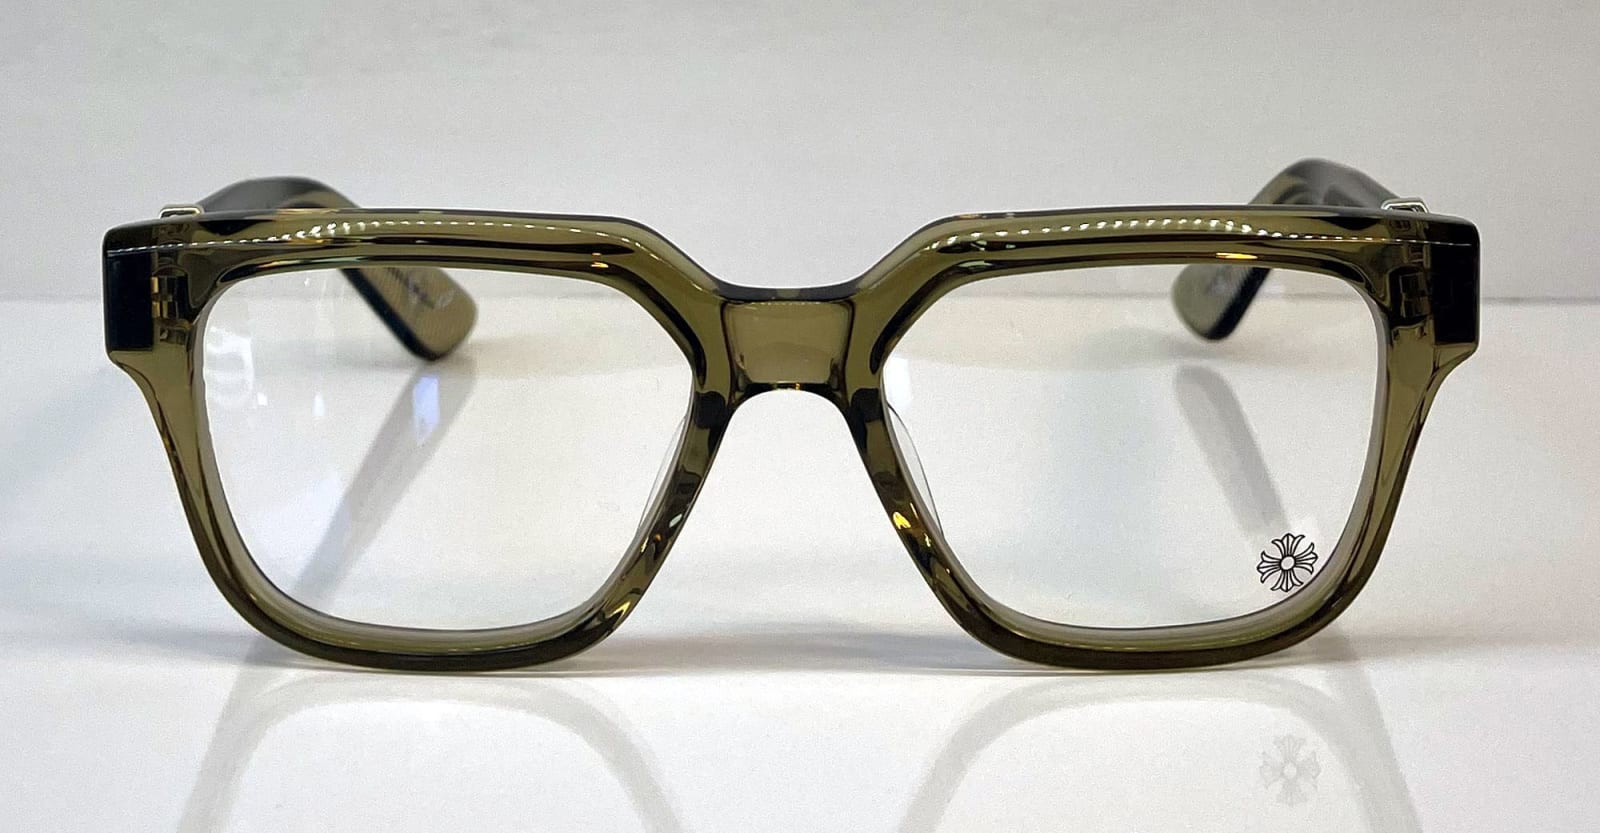 Chrome Hearts Vagillionaire Ii - Olive Rx Glasses In Olive Green